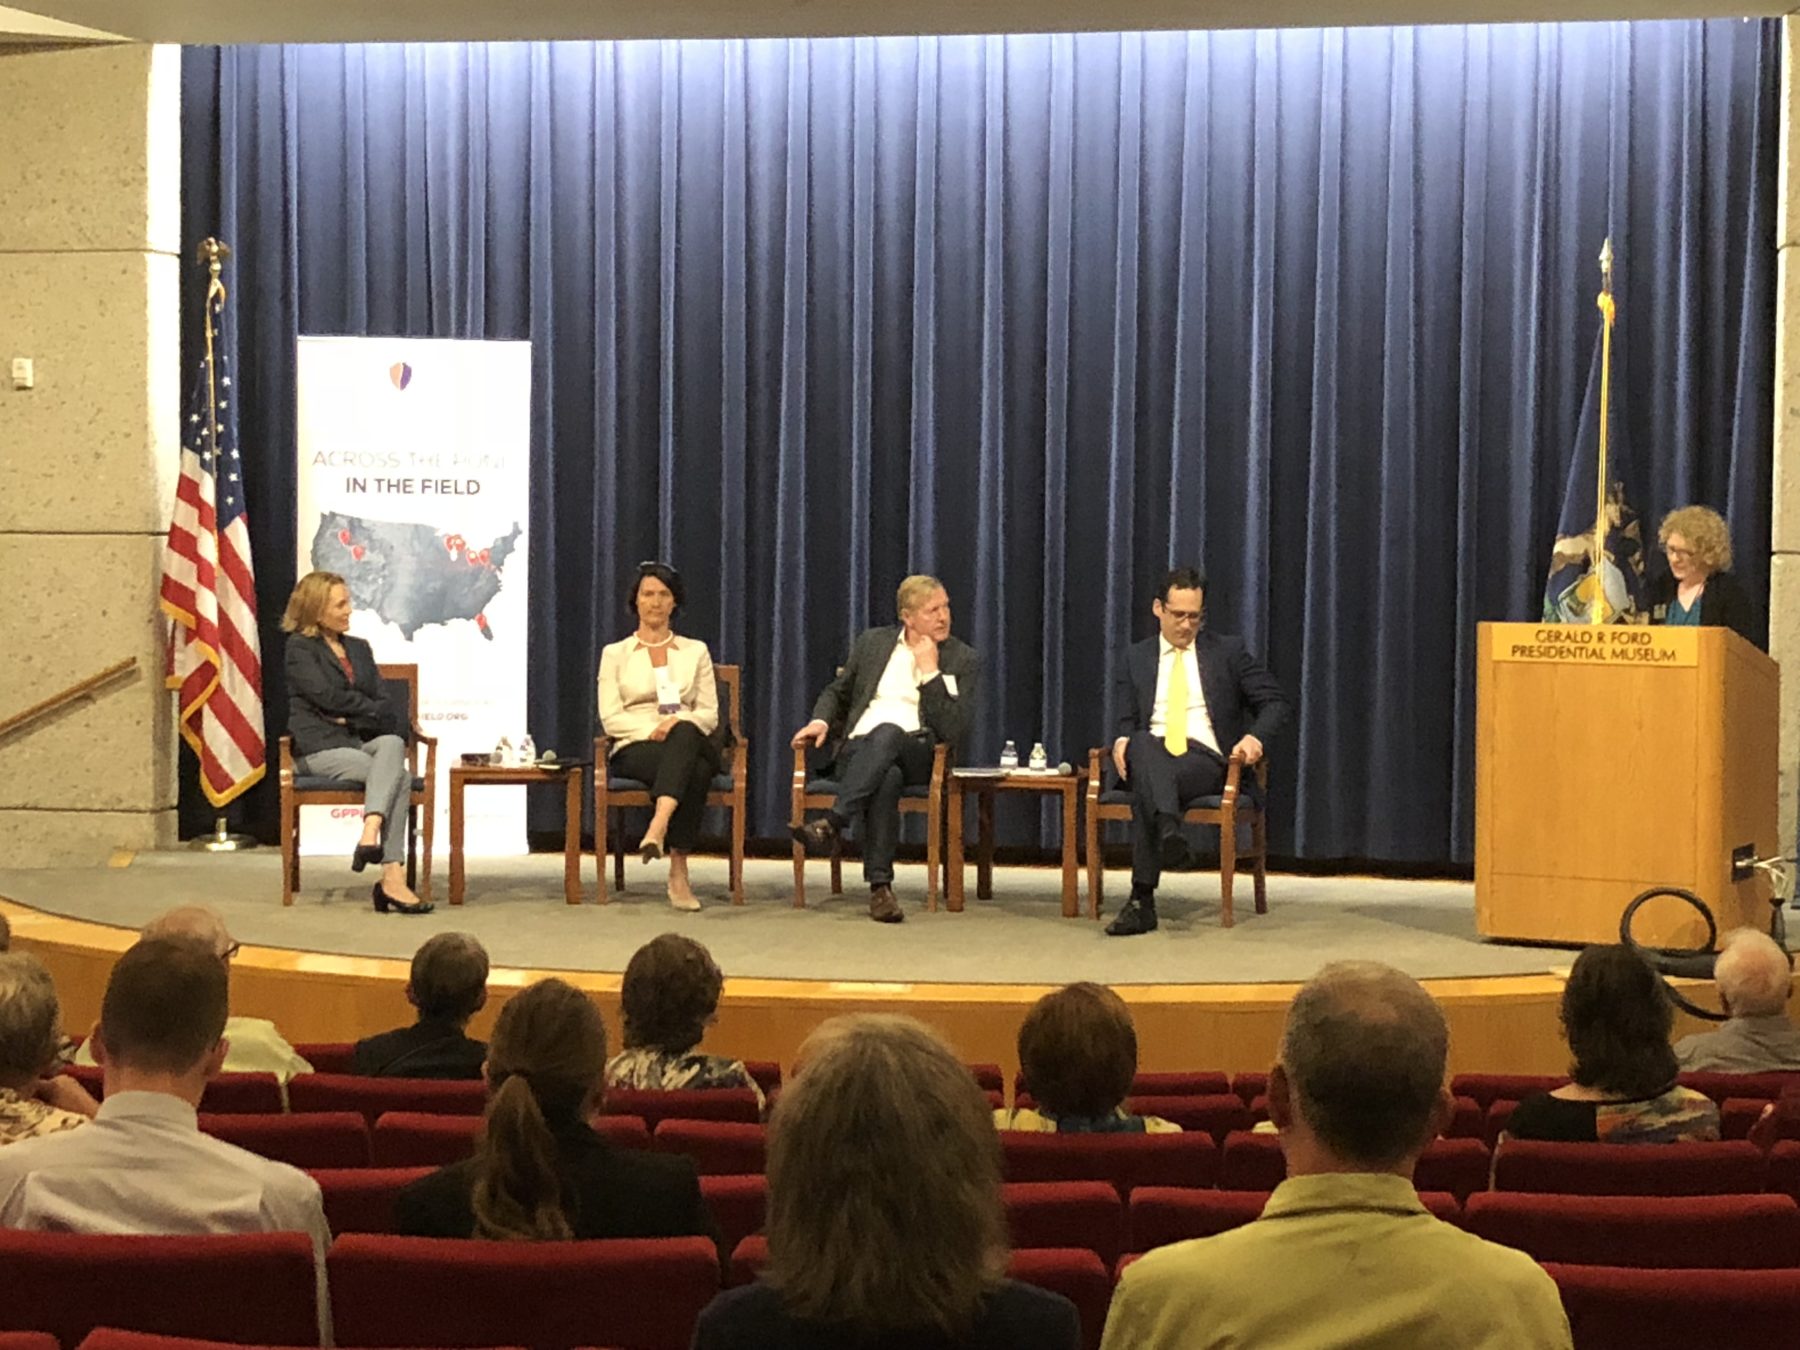 Dr. Erika Kubic gives opening remarks before a public forum entitled “A World in Disarray: Prospects and Challenges for Transatlantic Cooperation” at the Gerald R. Ford Presidential Museum